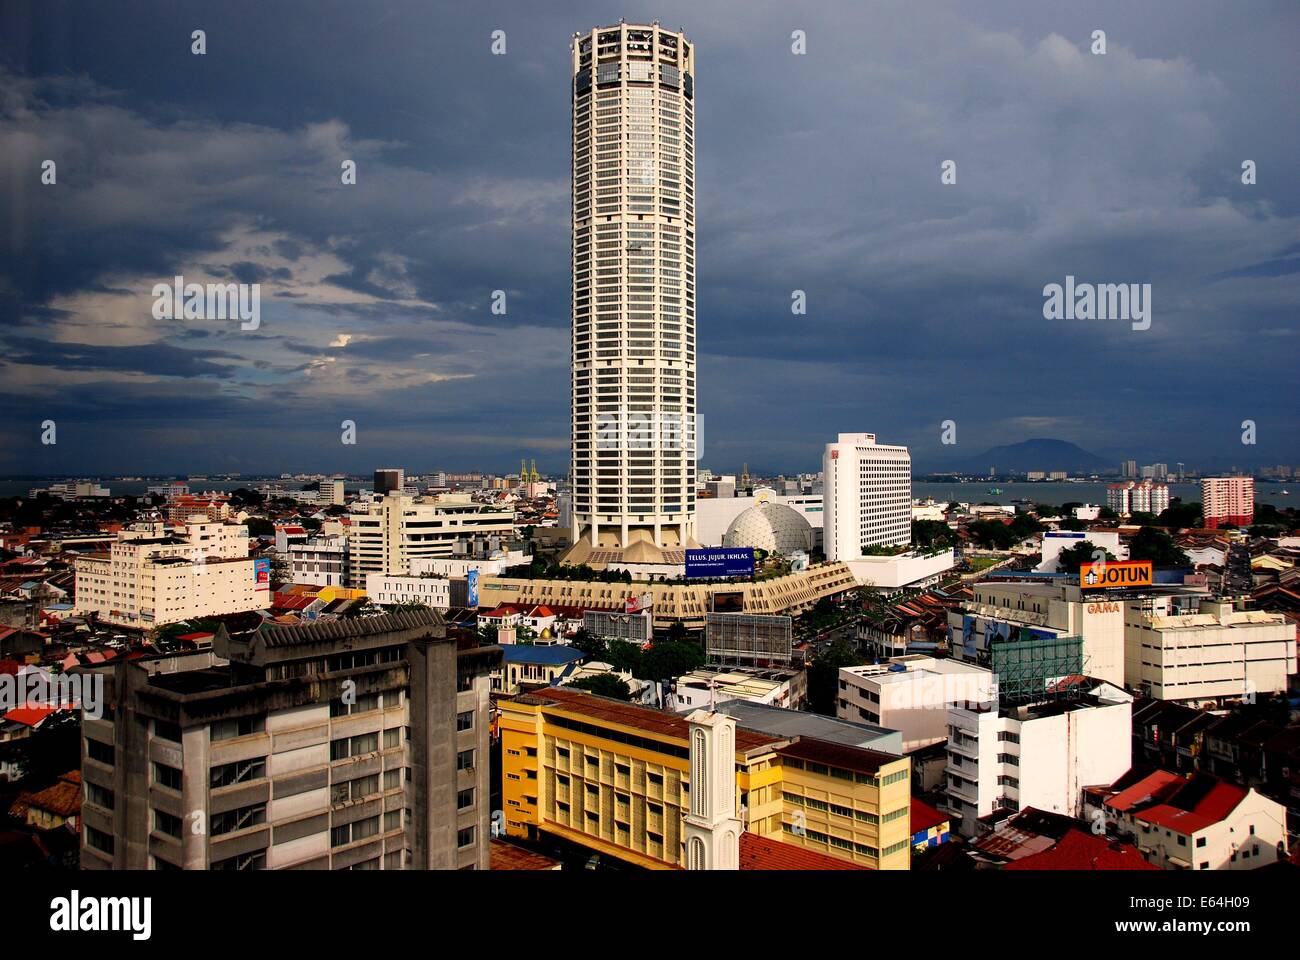 GEORGETOWN, MALAYSIA:  The 66-story Komtar Tower dominates the skyline of the city  * Stock Photo